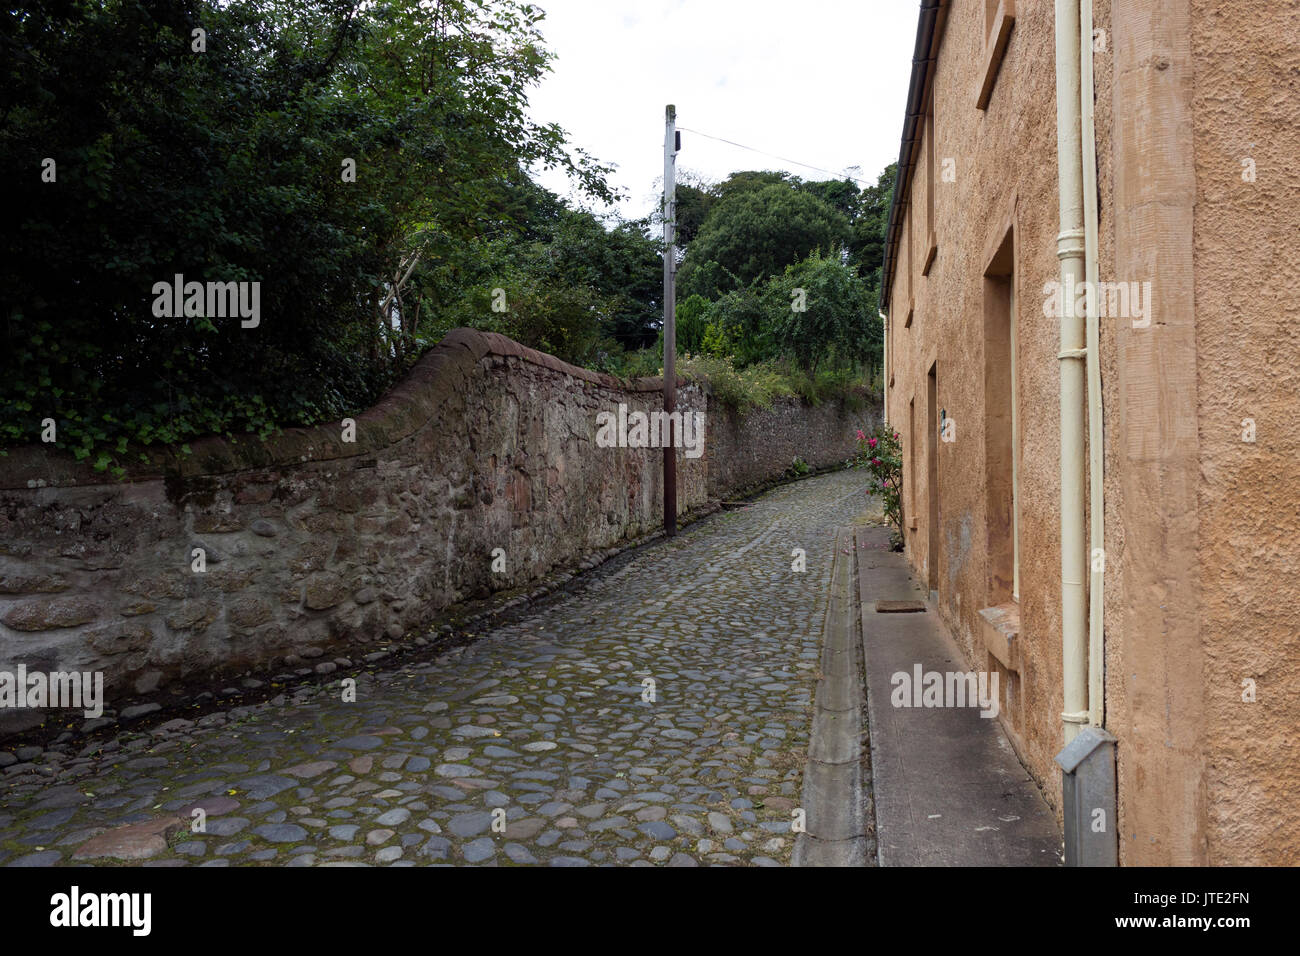 Scotland, Highlands, Town of Cromarty, Scottish Scenery, Housing, Exterior, Cobbled Road, Greenery, Trees, Landscape, Walkway, Property Stock Photo